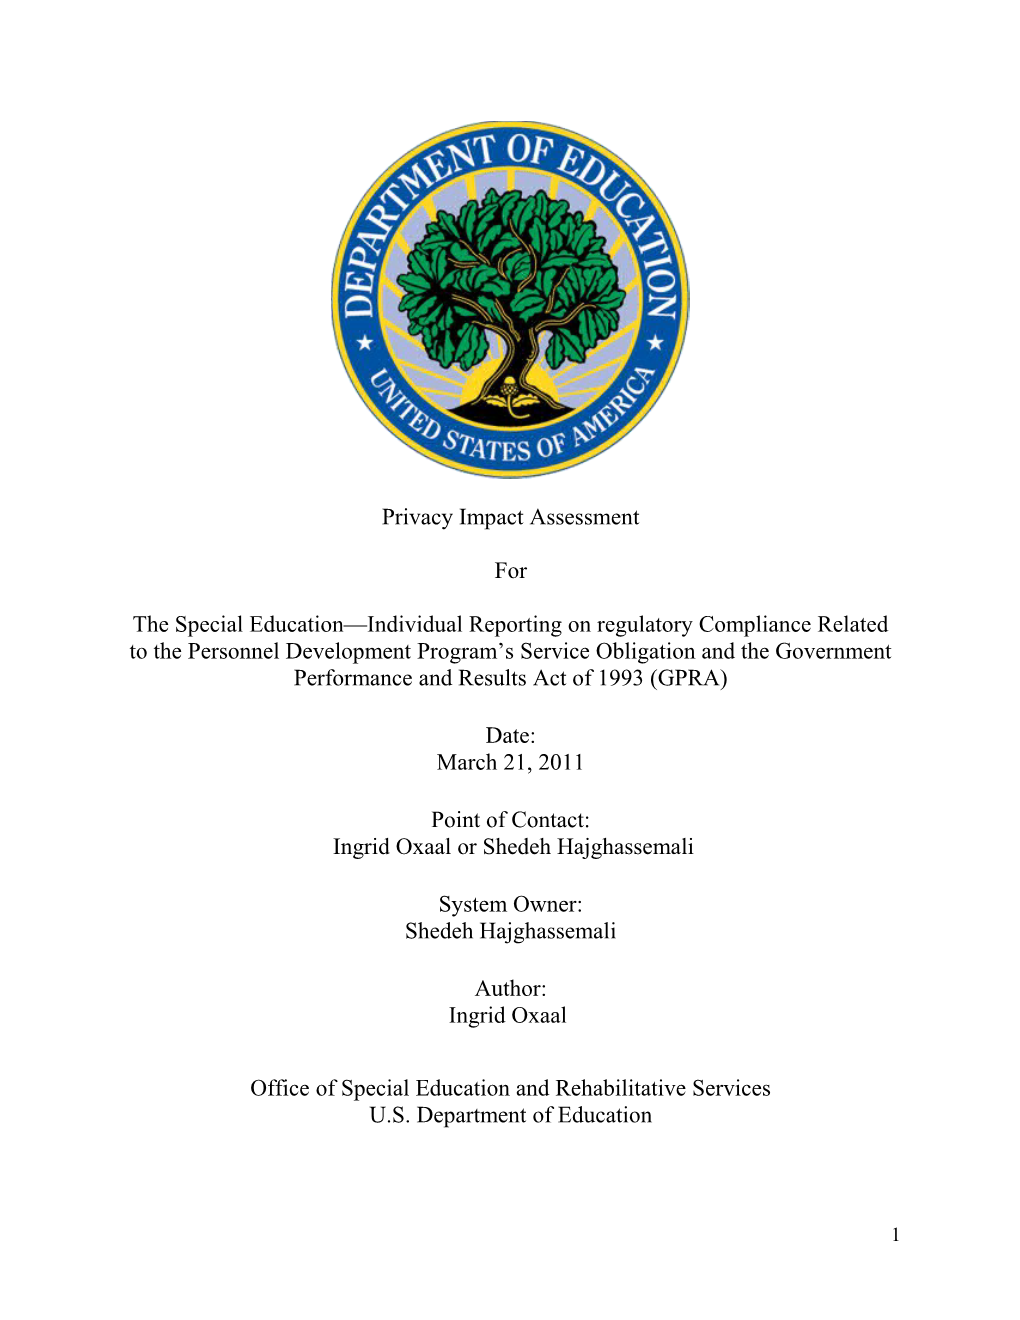 Privacy Impact Assessment for the Special Education Individual Reporting on Regulatory